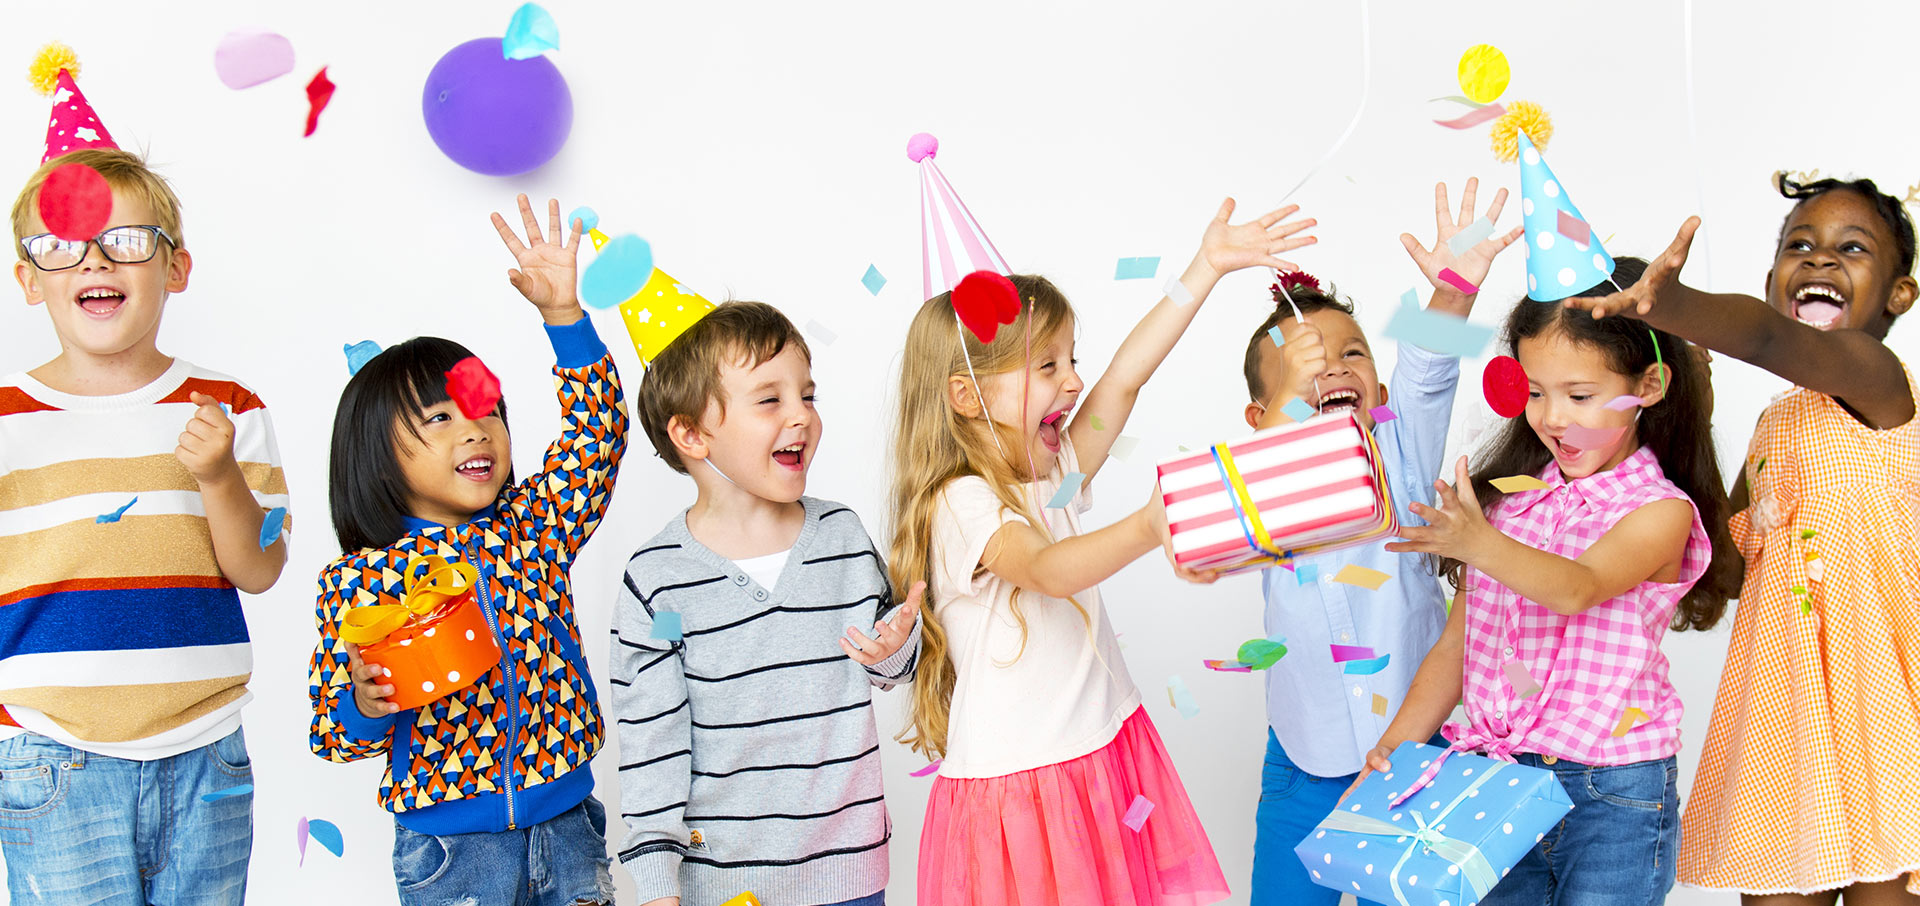 Several children celebrating with birthday hats and confetti